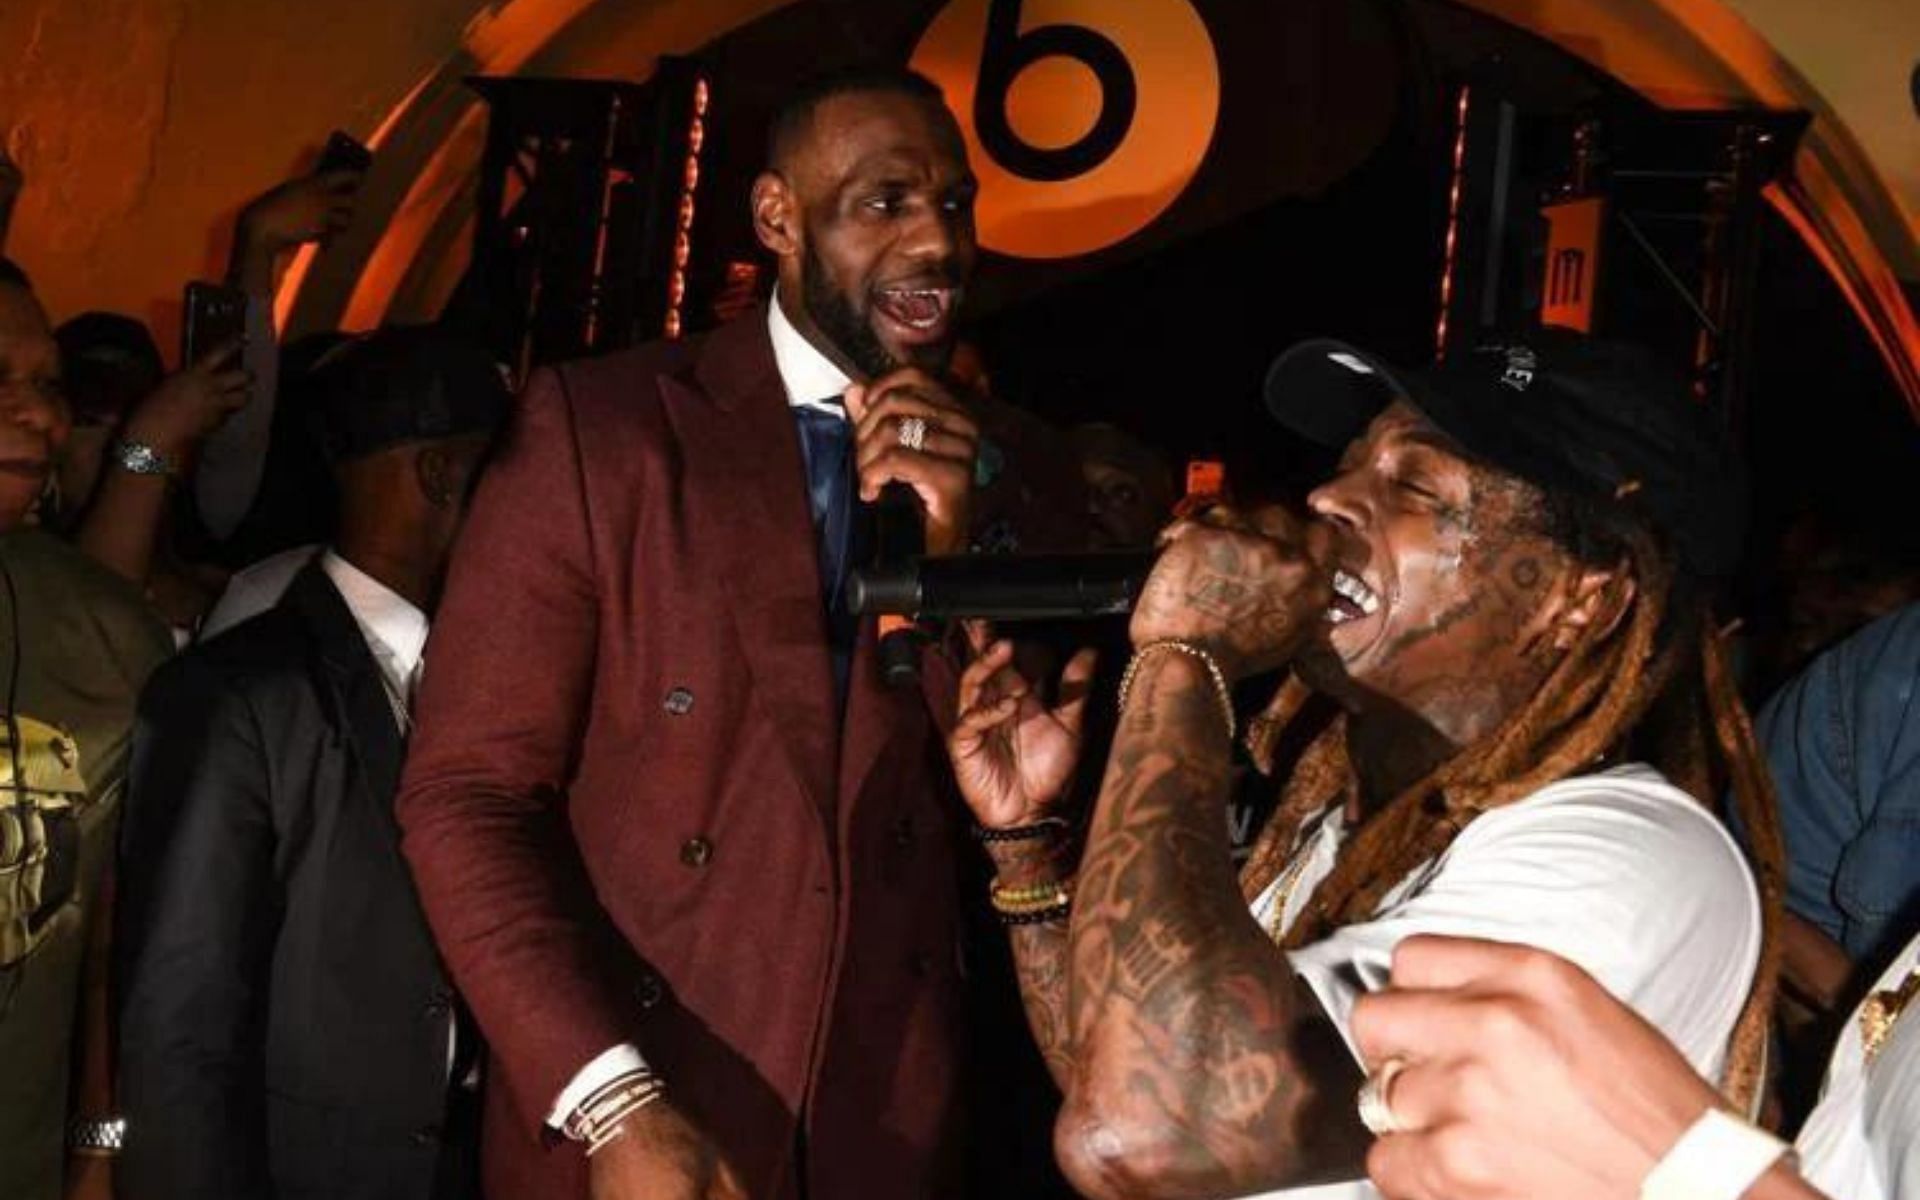 LeBron James and Lil Wayne [image courtesy of Beats by Dre]